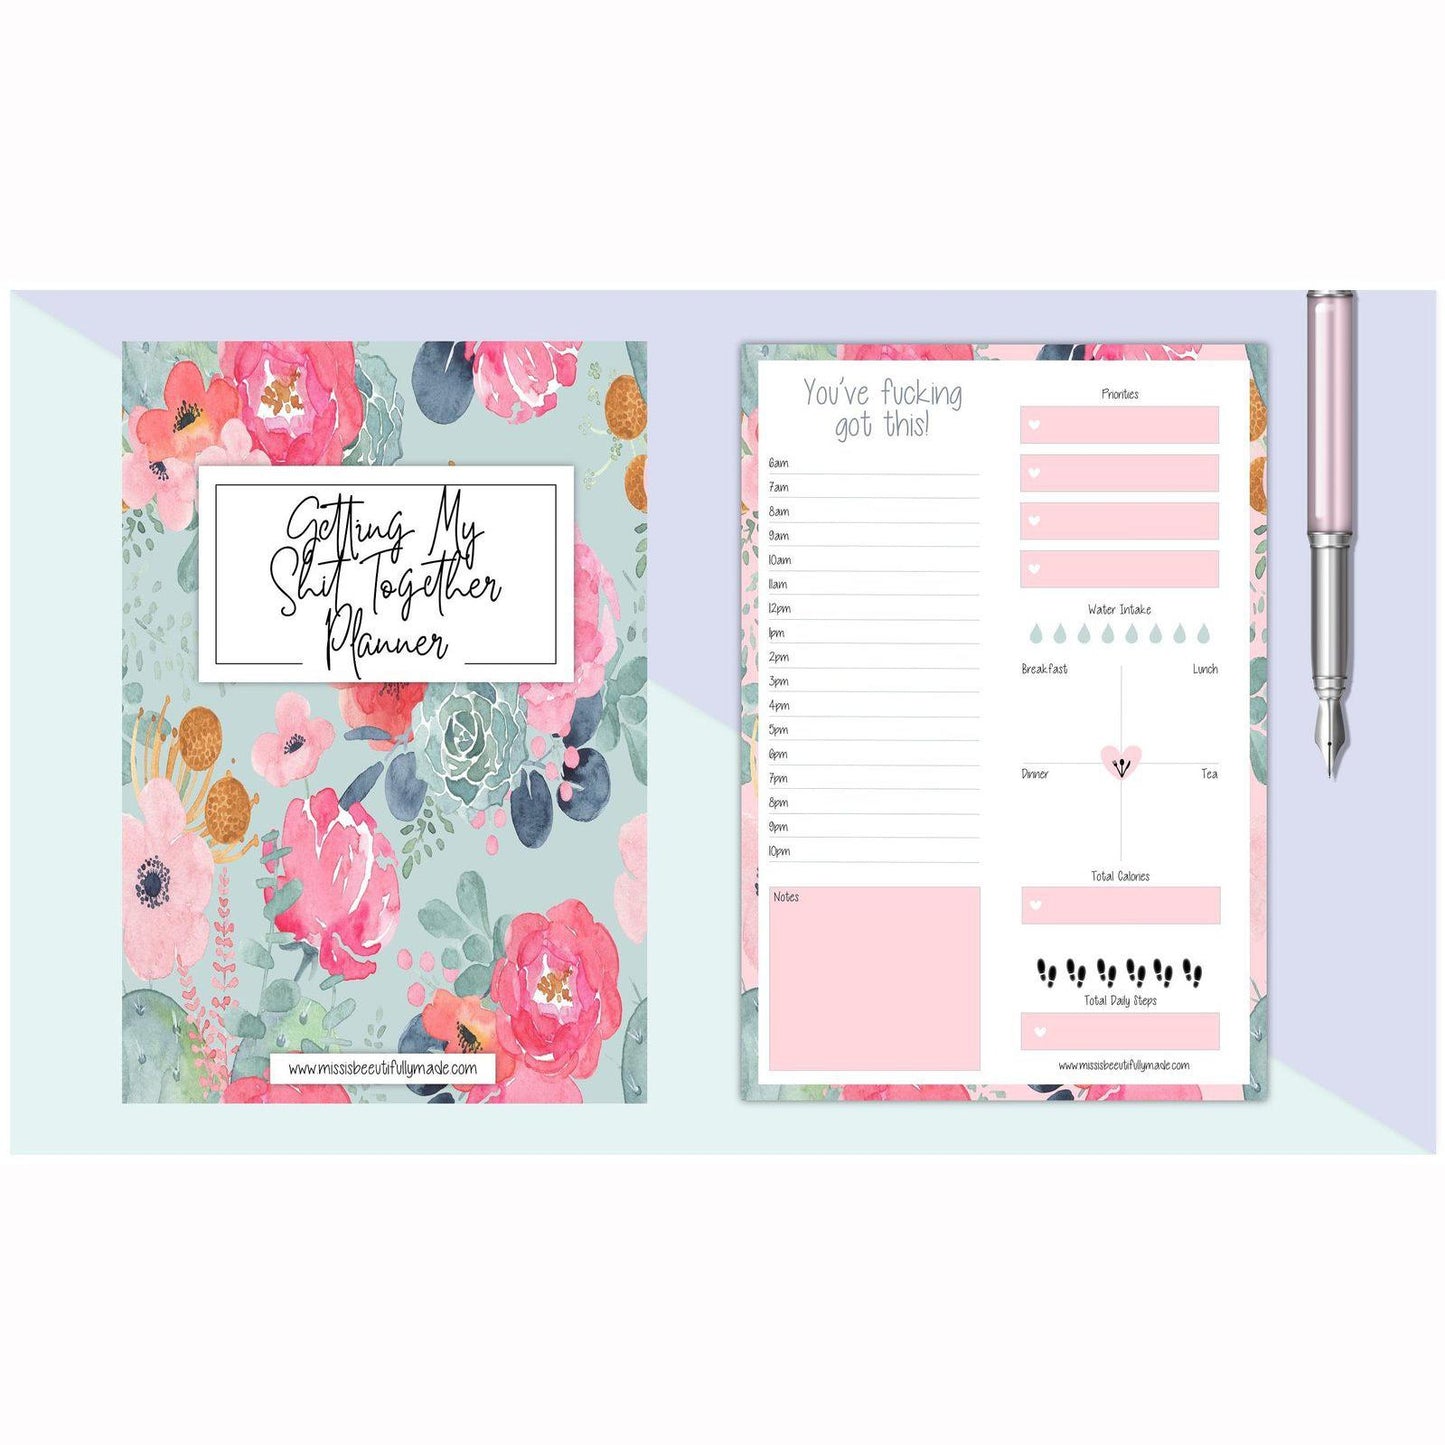 Planner - getting shit done (floral)